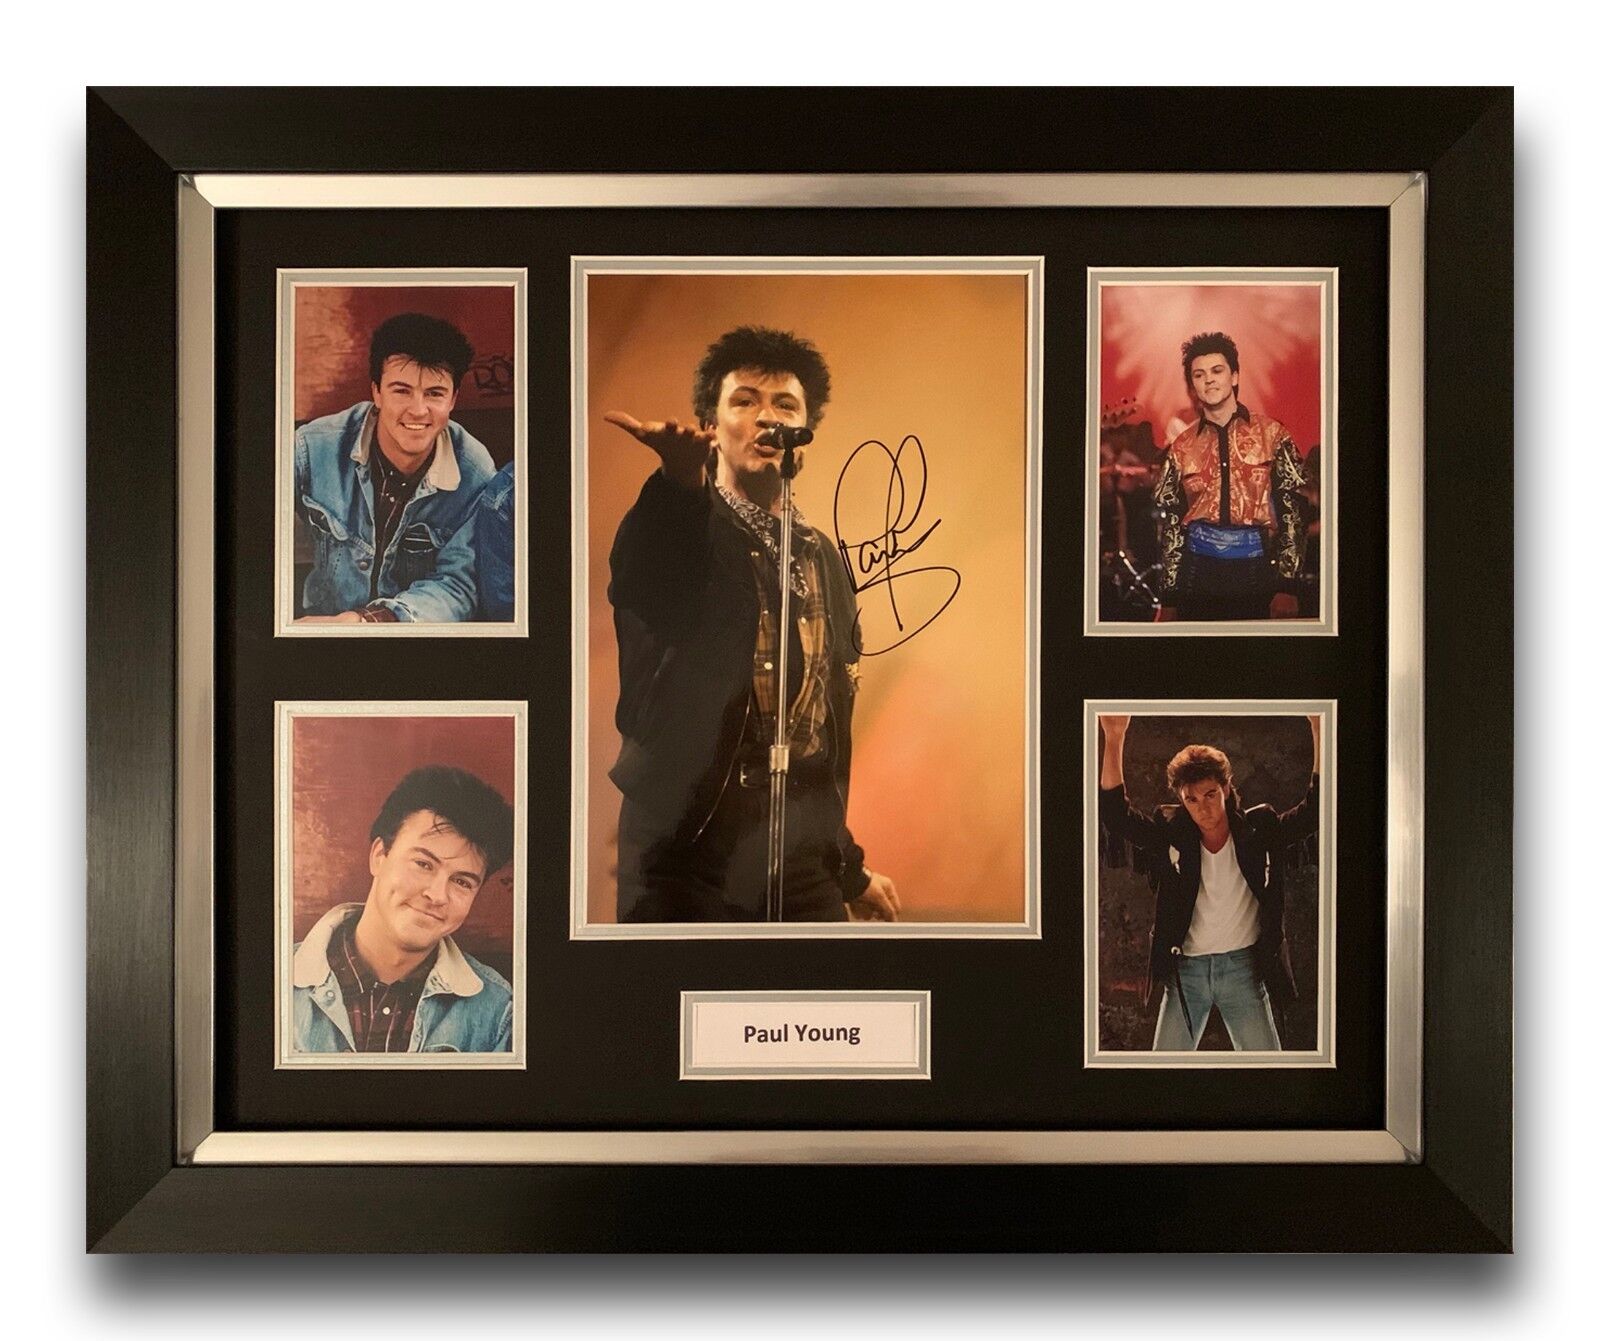 PAUL YOUNG HAND SIGNED FRAMED Photo Poster painting DISPLAY MUSIC MEMORABILIA.